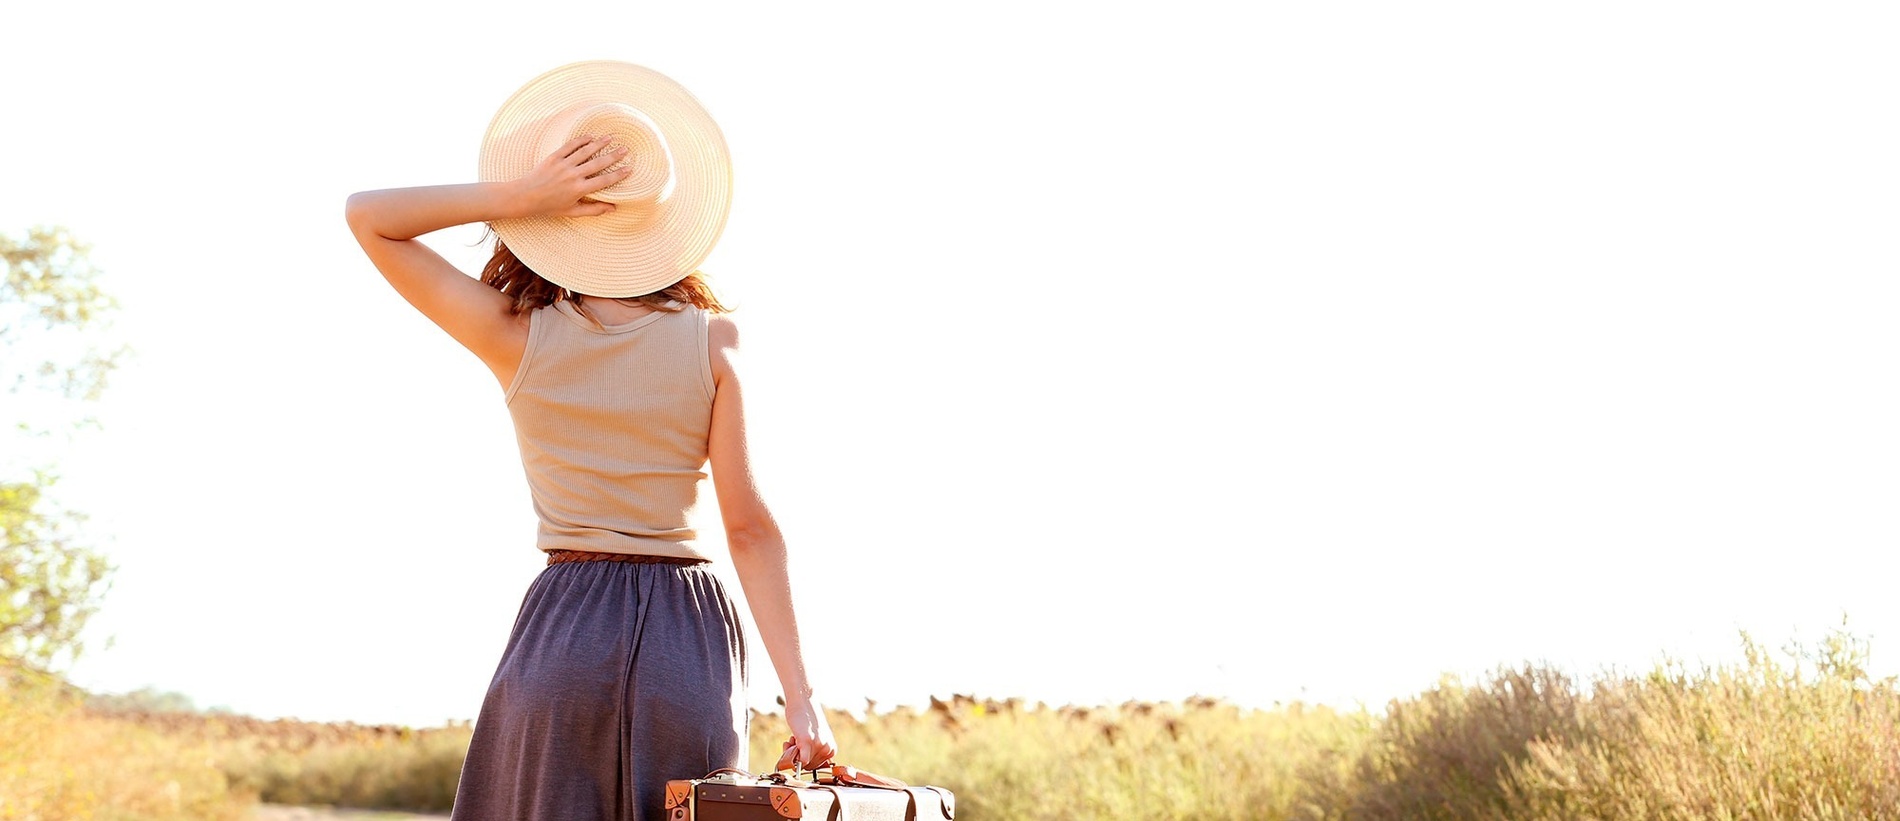 a woman wearing a hat holds a suitcase in a field